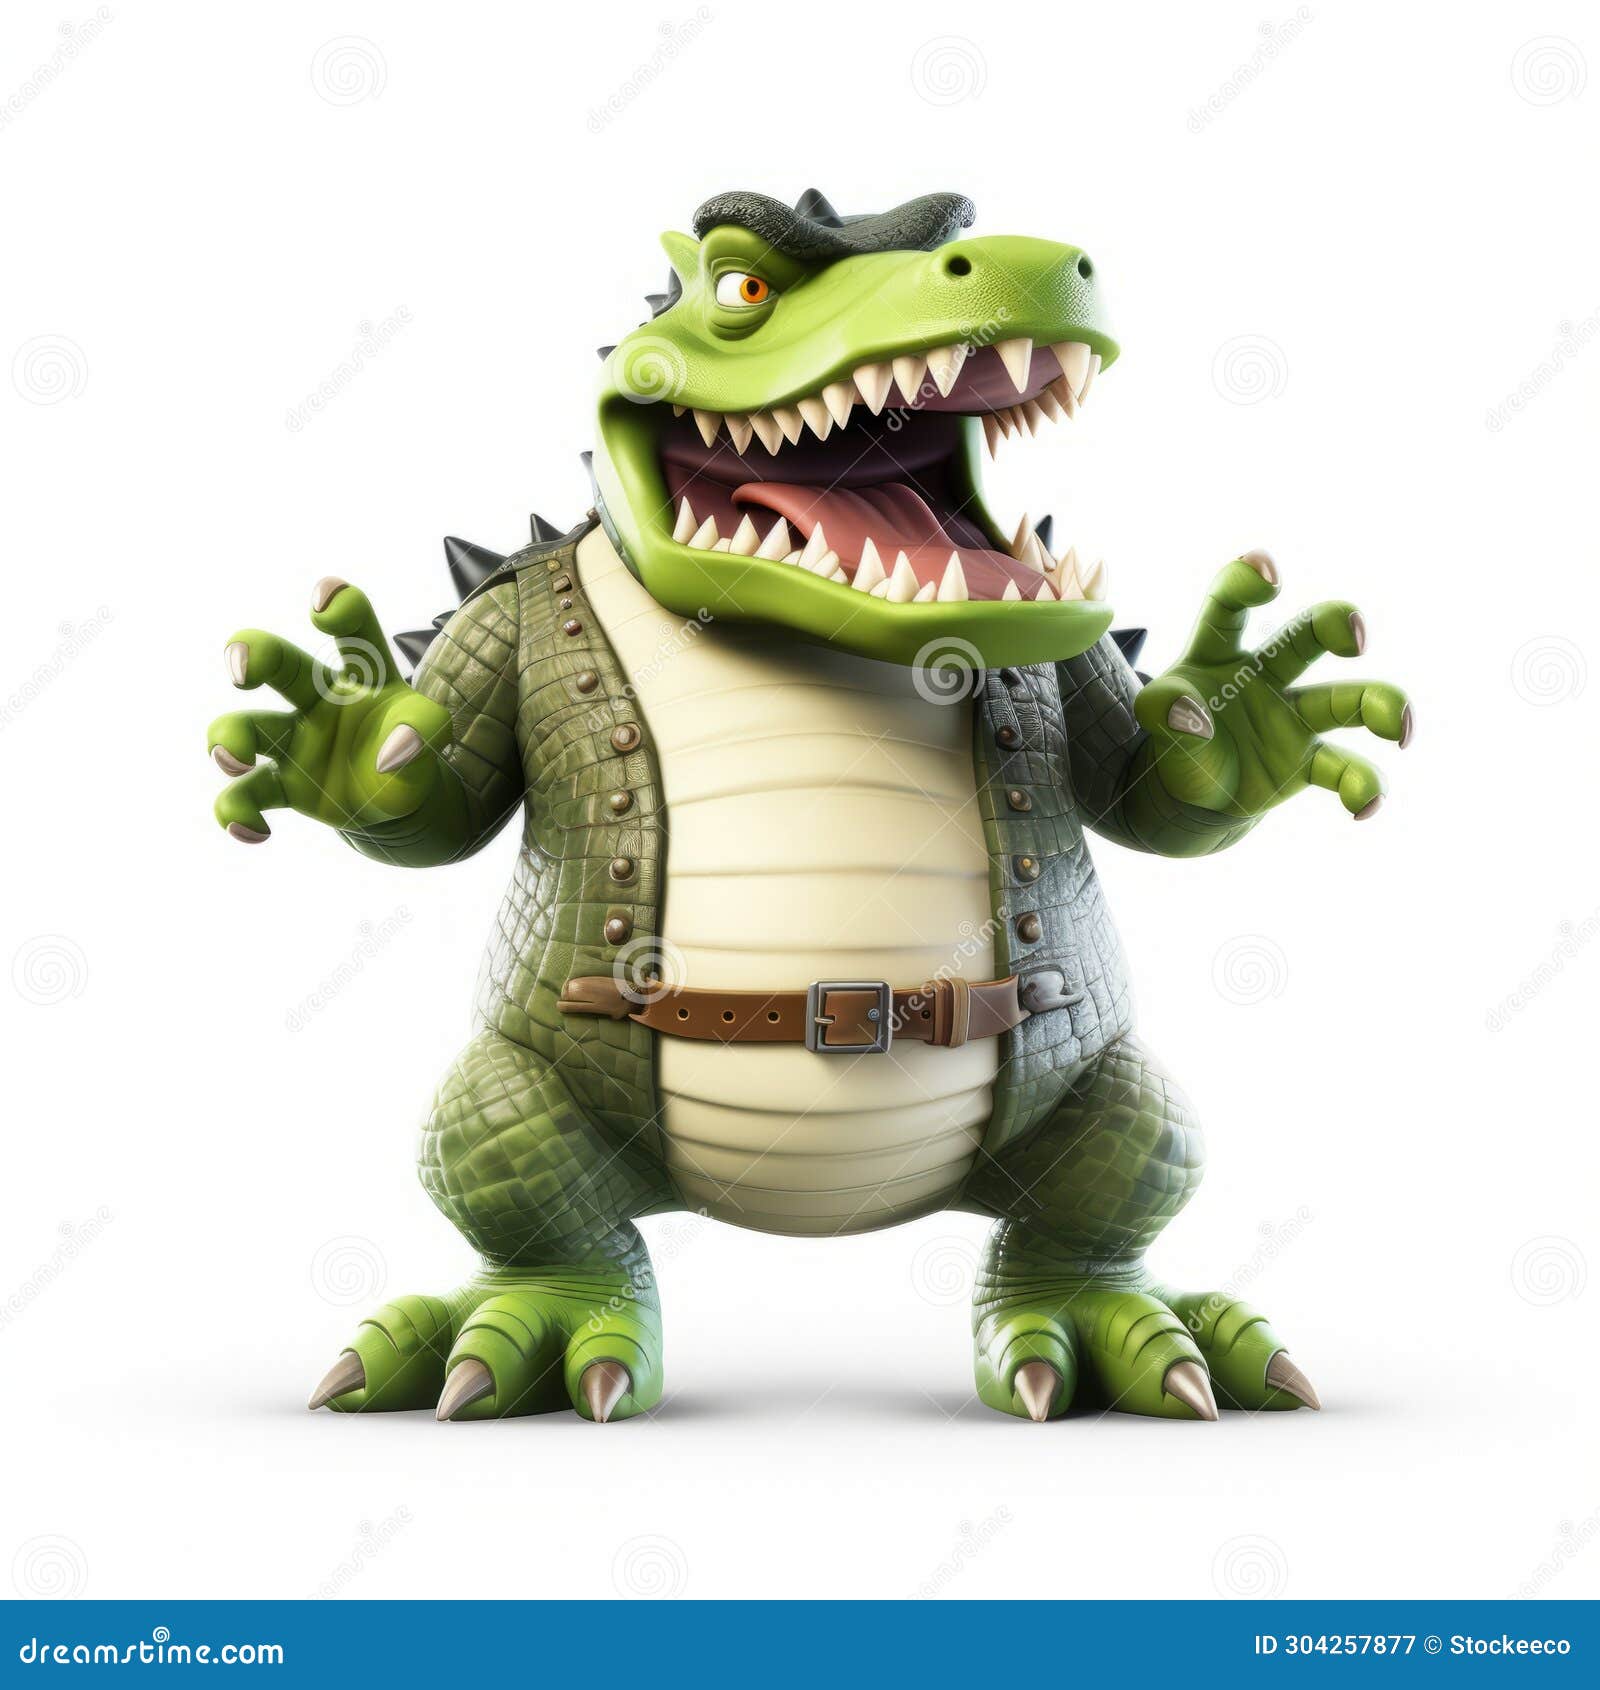 charming 3d crocodile character with xbox 360 graphics